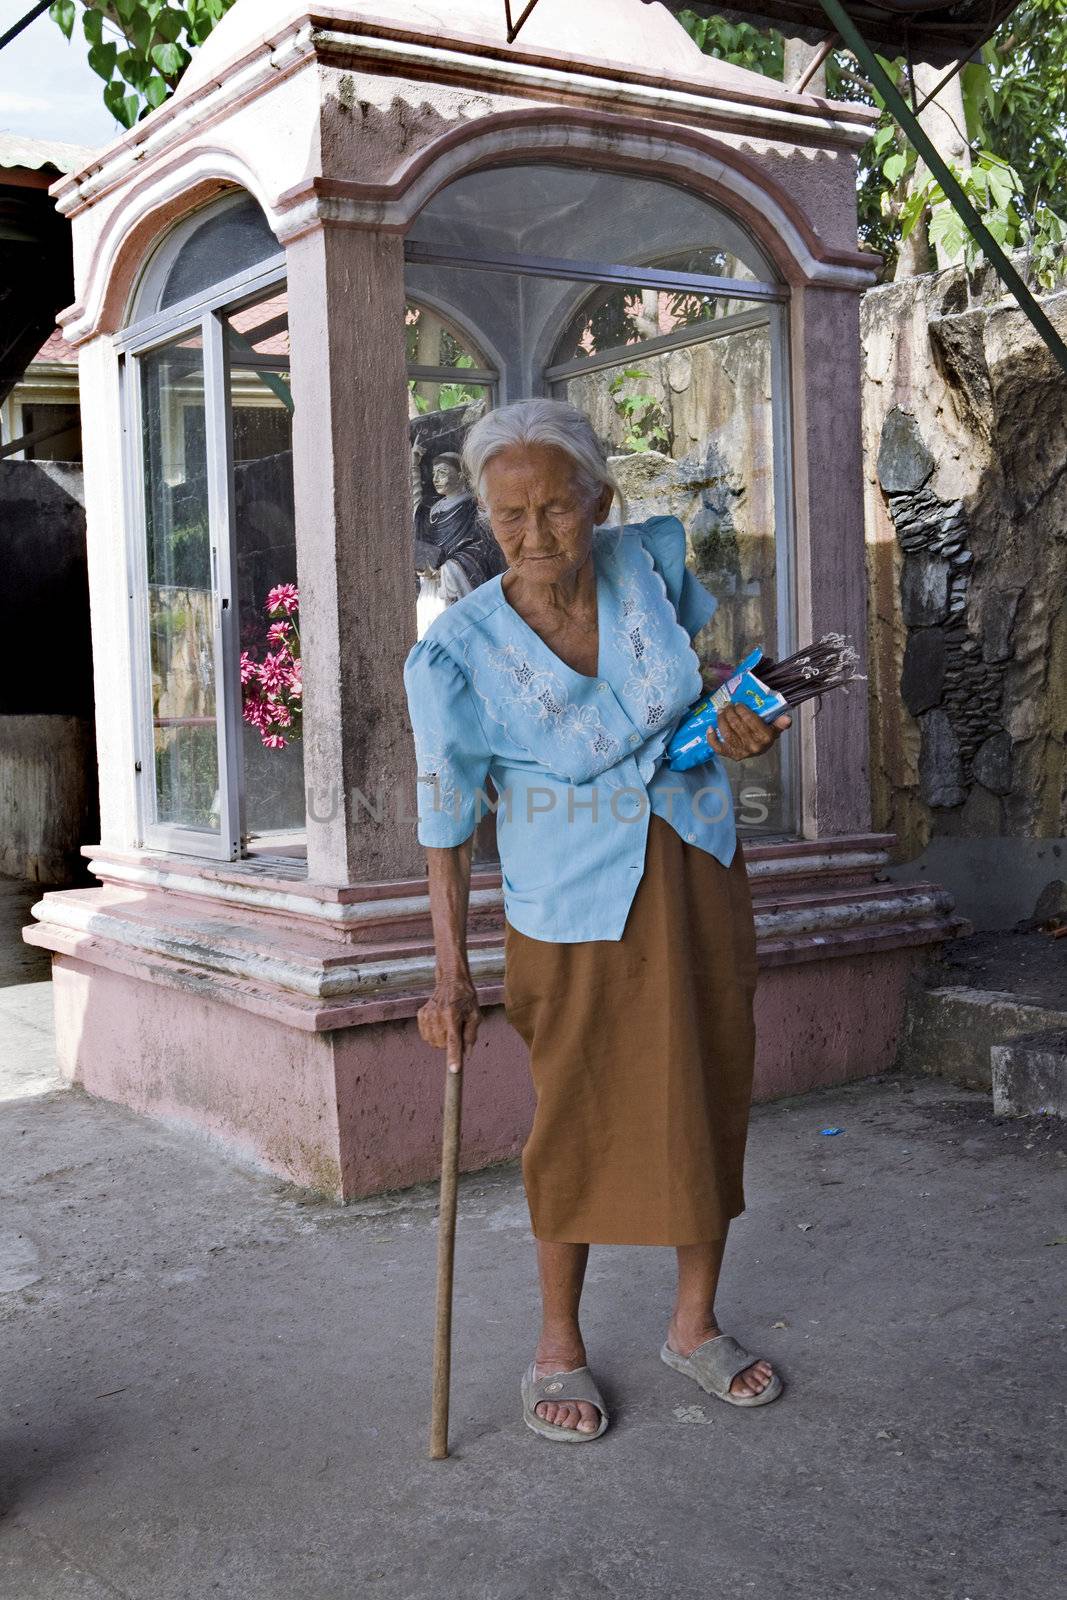 May 2012 - Bogo City, Cebu Island, Philippines - Elderly, blind Filipino woman walking with a cane selling votive candles near a Catholic christian shrine. Senior citizens are held in high respect in the Philippine culture no matter how old they are.